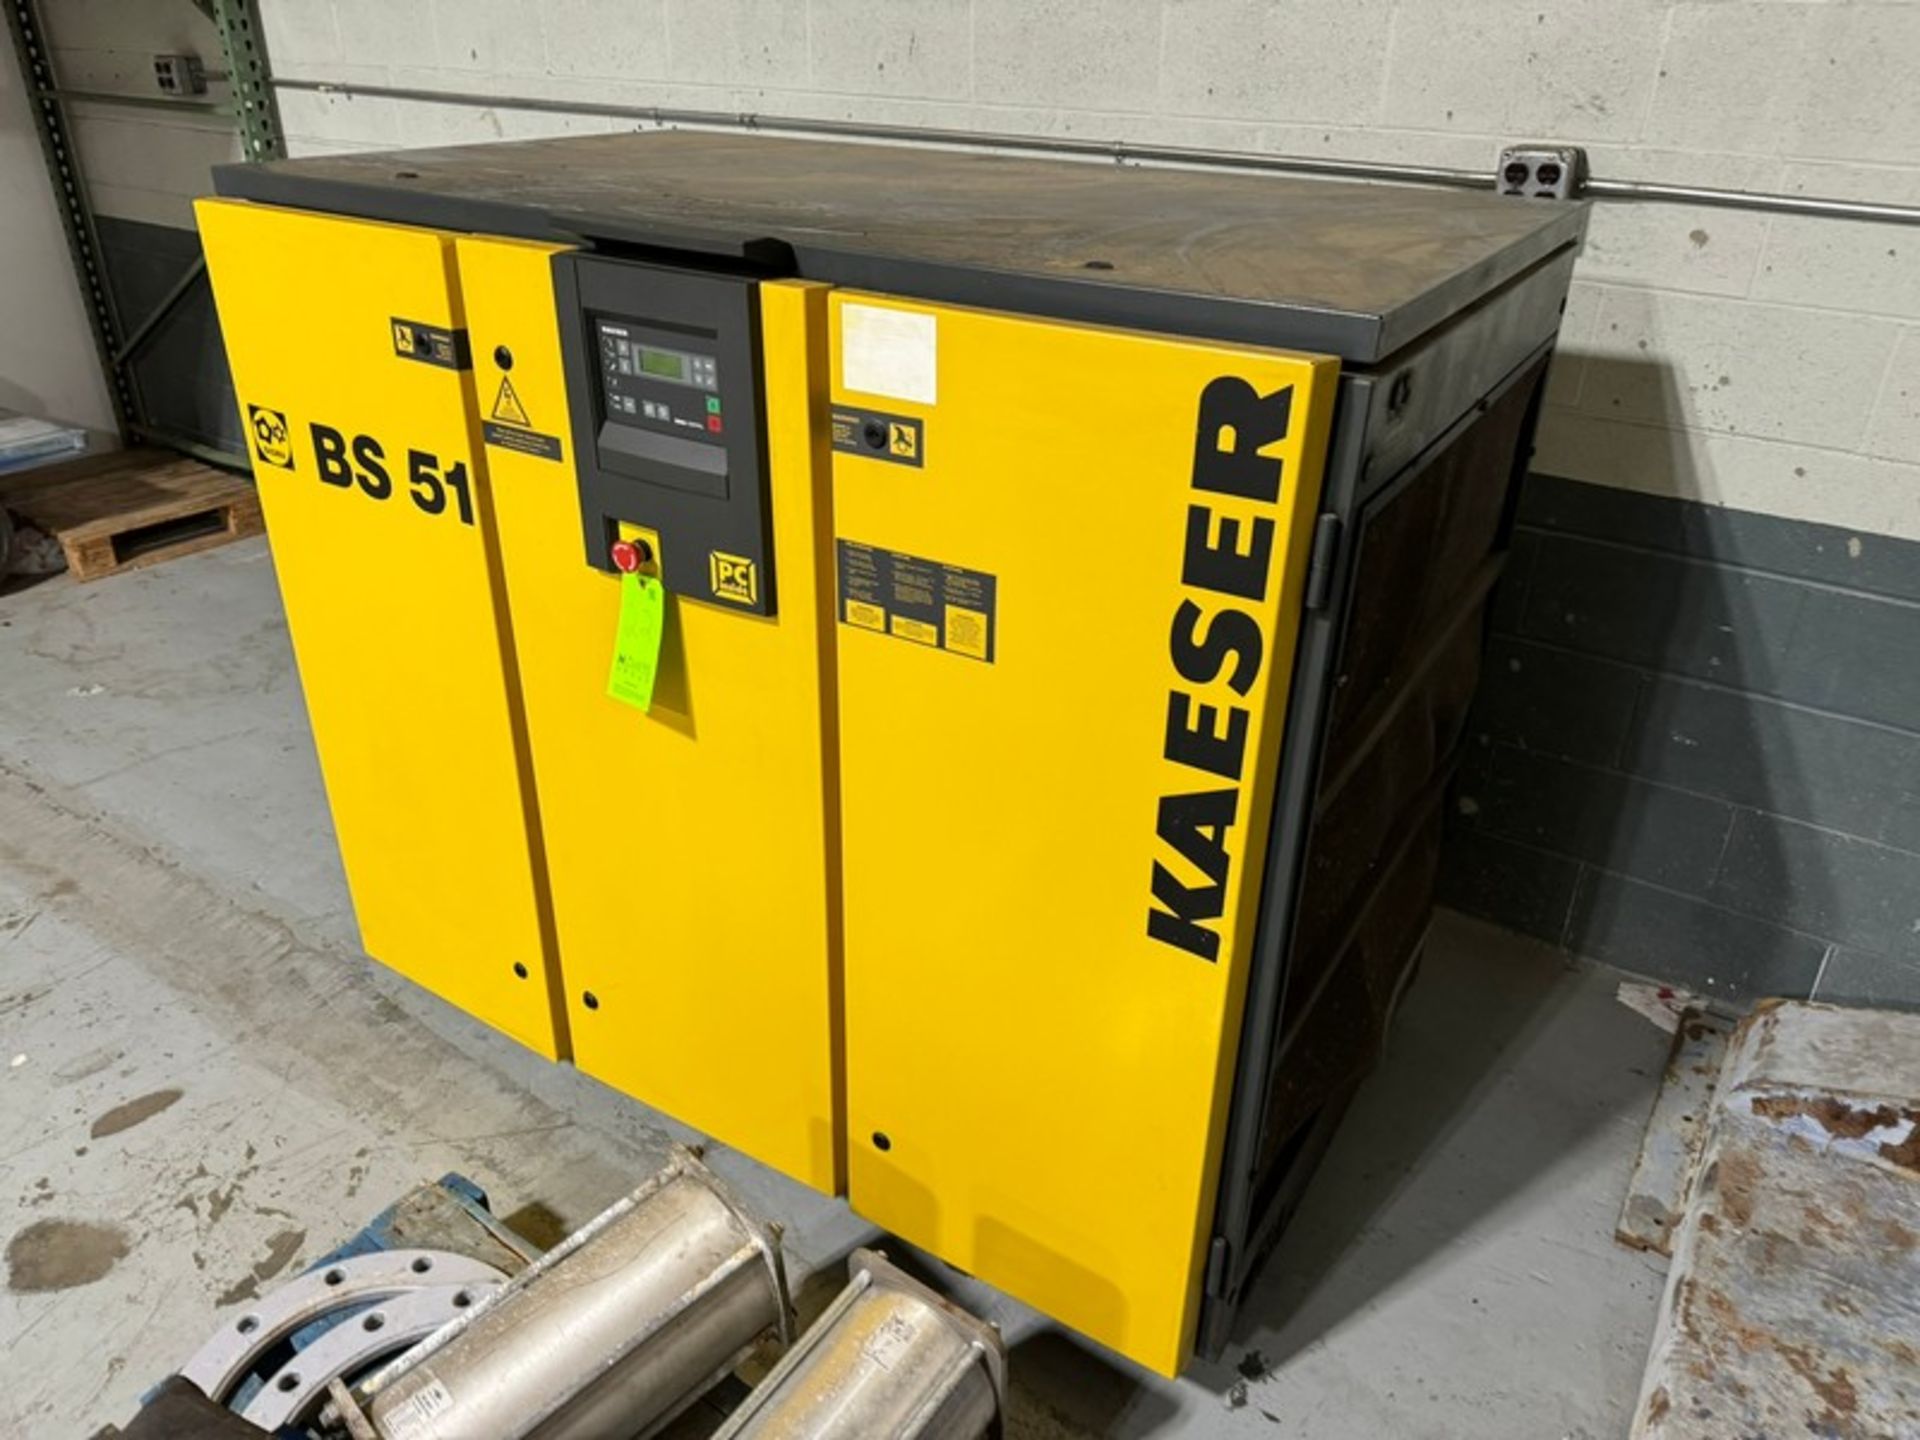 2001 KAESER BS 51 Air Compressor, S/N 1127, 460 Volts, 3 Phase (LOCATED IN GLOUCESTER, MA) - Image 3 of 6